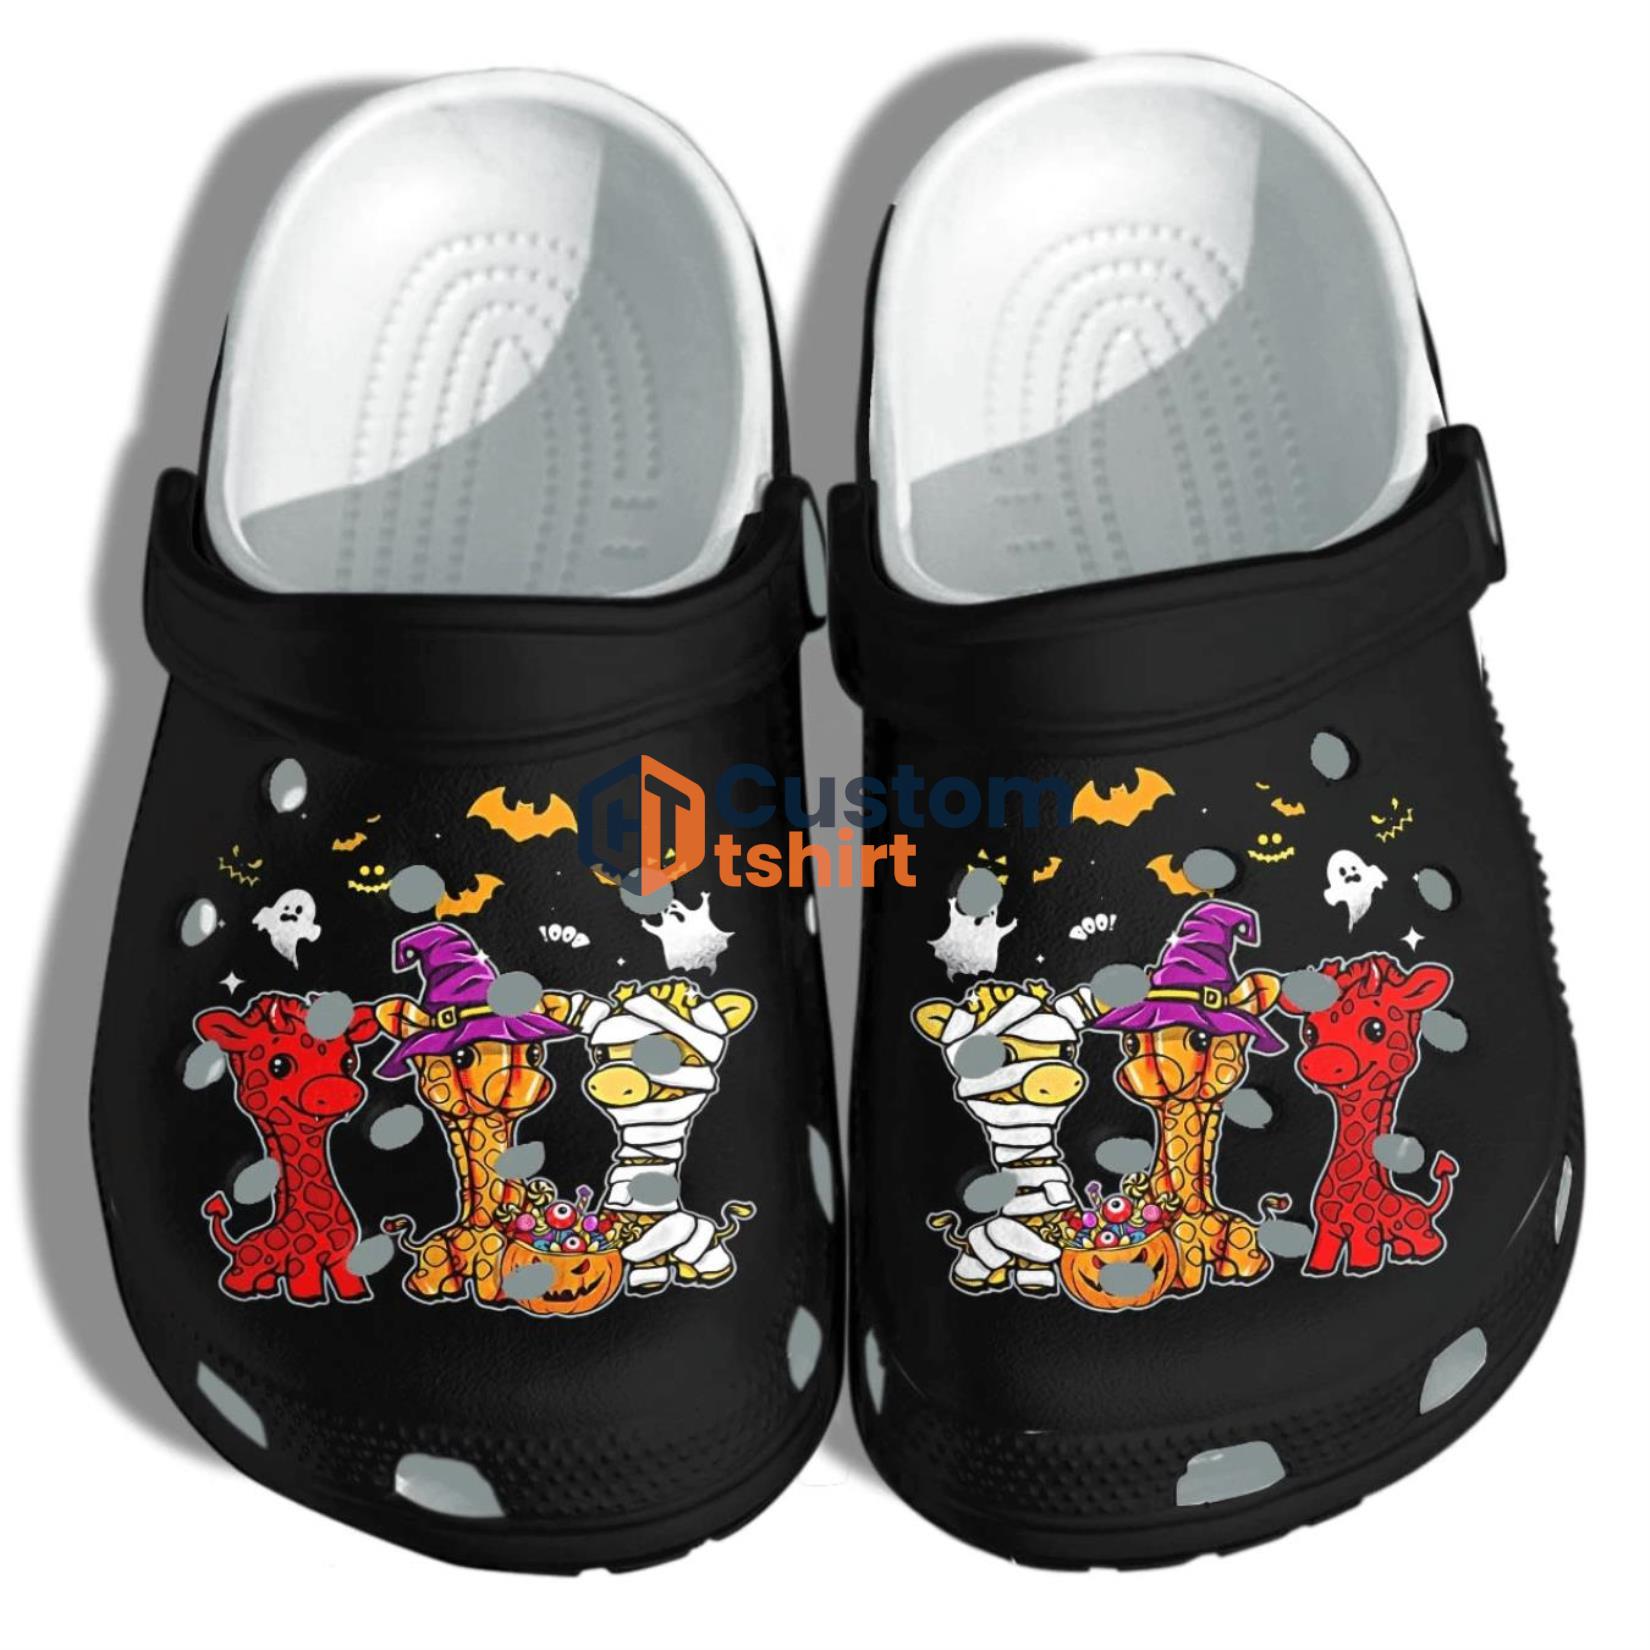 Little Giraffes Halloween Cosplay Witch Mummy Clog Shoes - Halloween Clog Shoes band Birthday Gift For Boy Girl Product Photo 1 Product photo 1